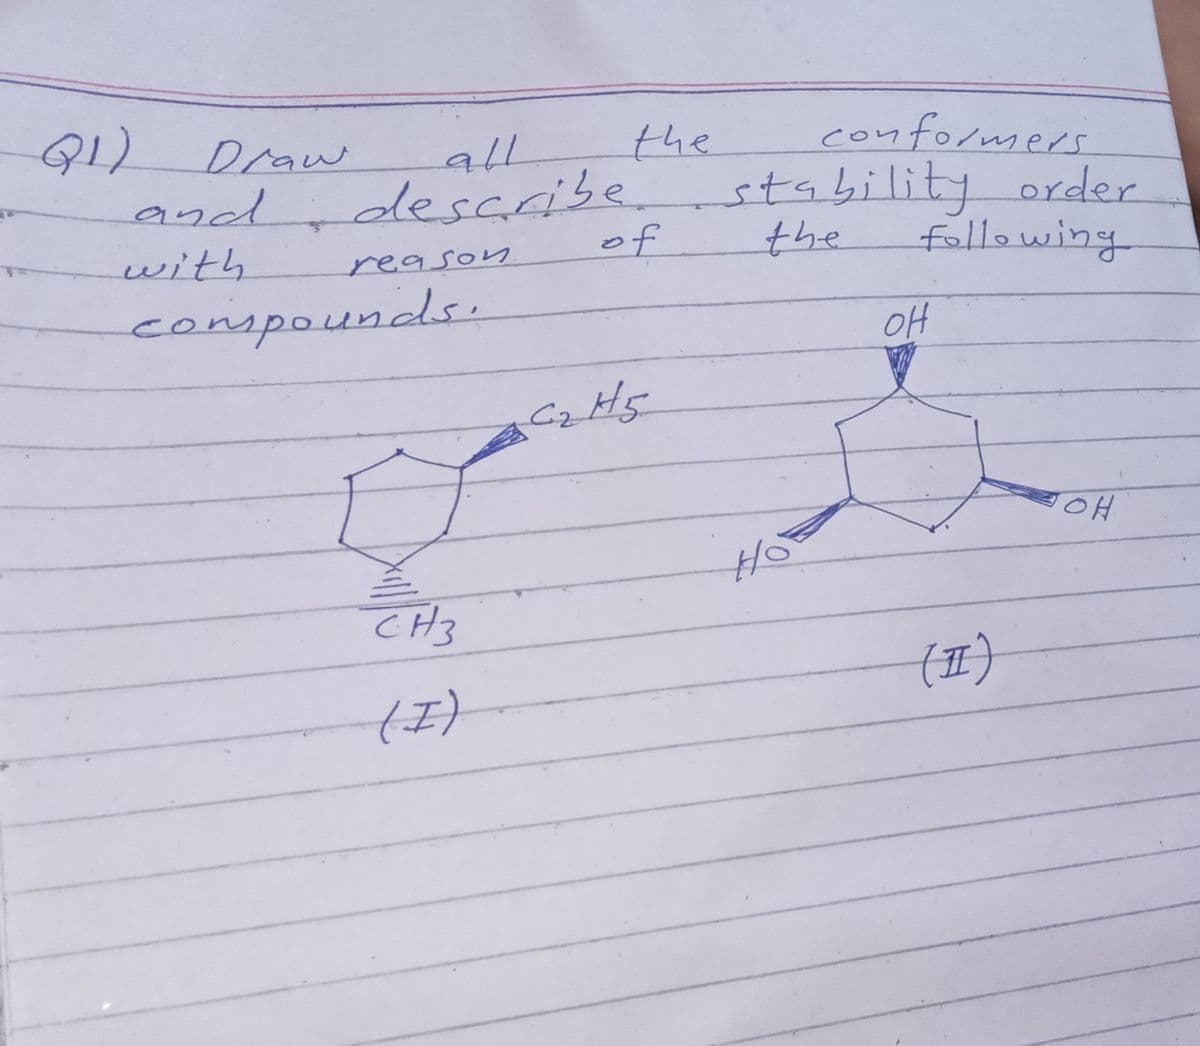 1)
conformers
the
stability order
the
Draw
all
and describe
with
of
fllowing
reason
compounds.
oH
Cz
HO.
CH3
(표)
()
